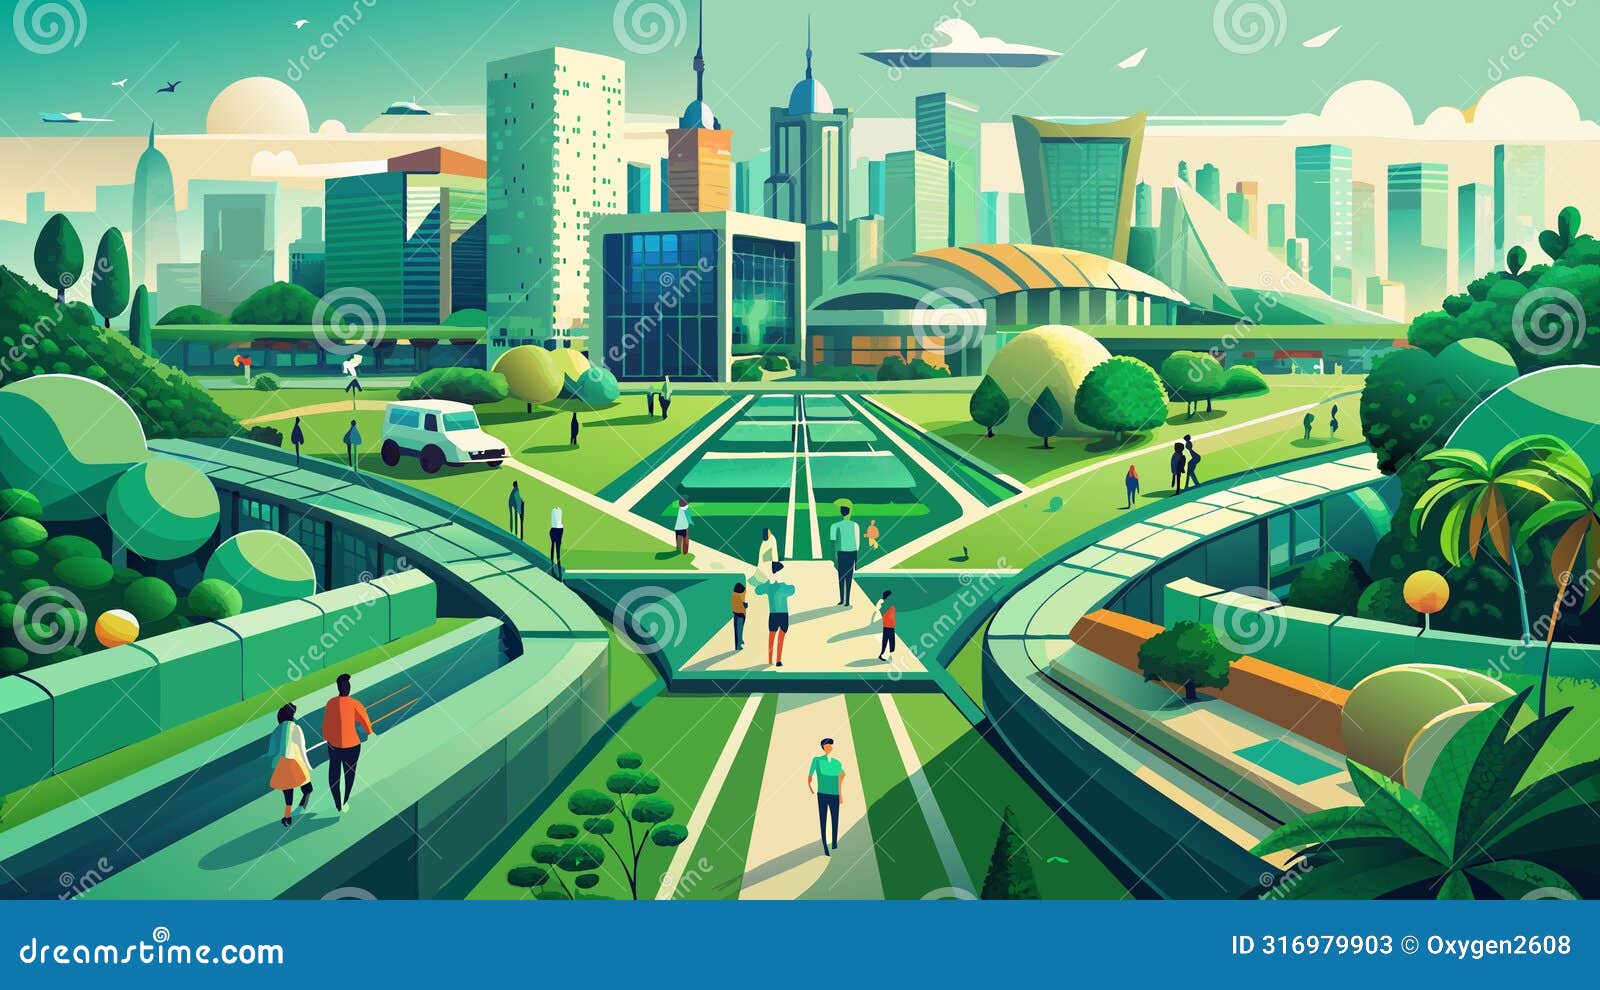 vibrant, futuristic cityscape  with pedestrians and green spaces